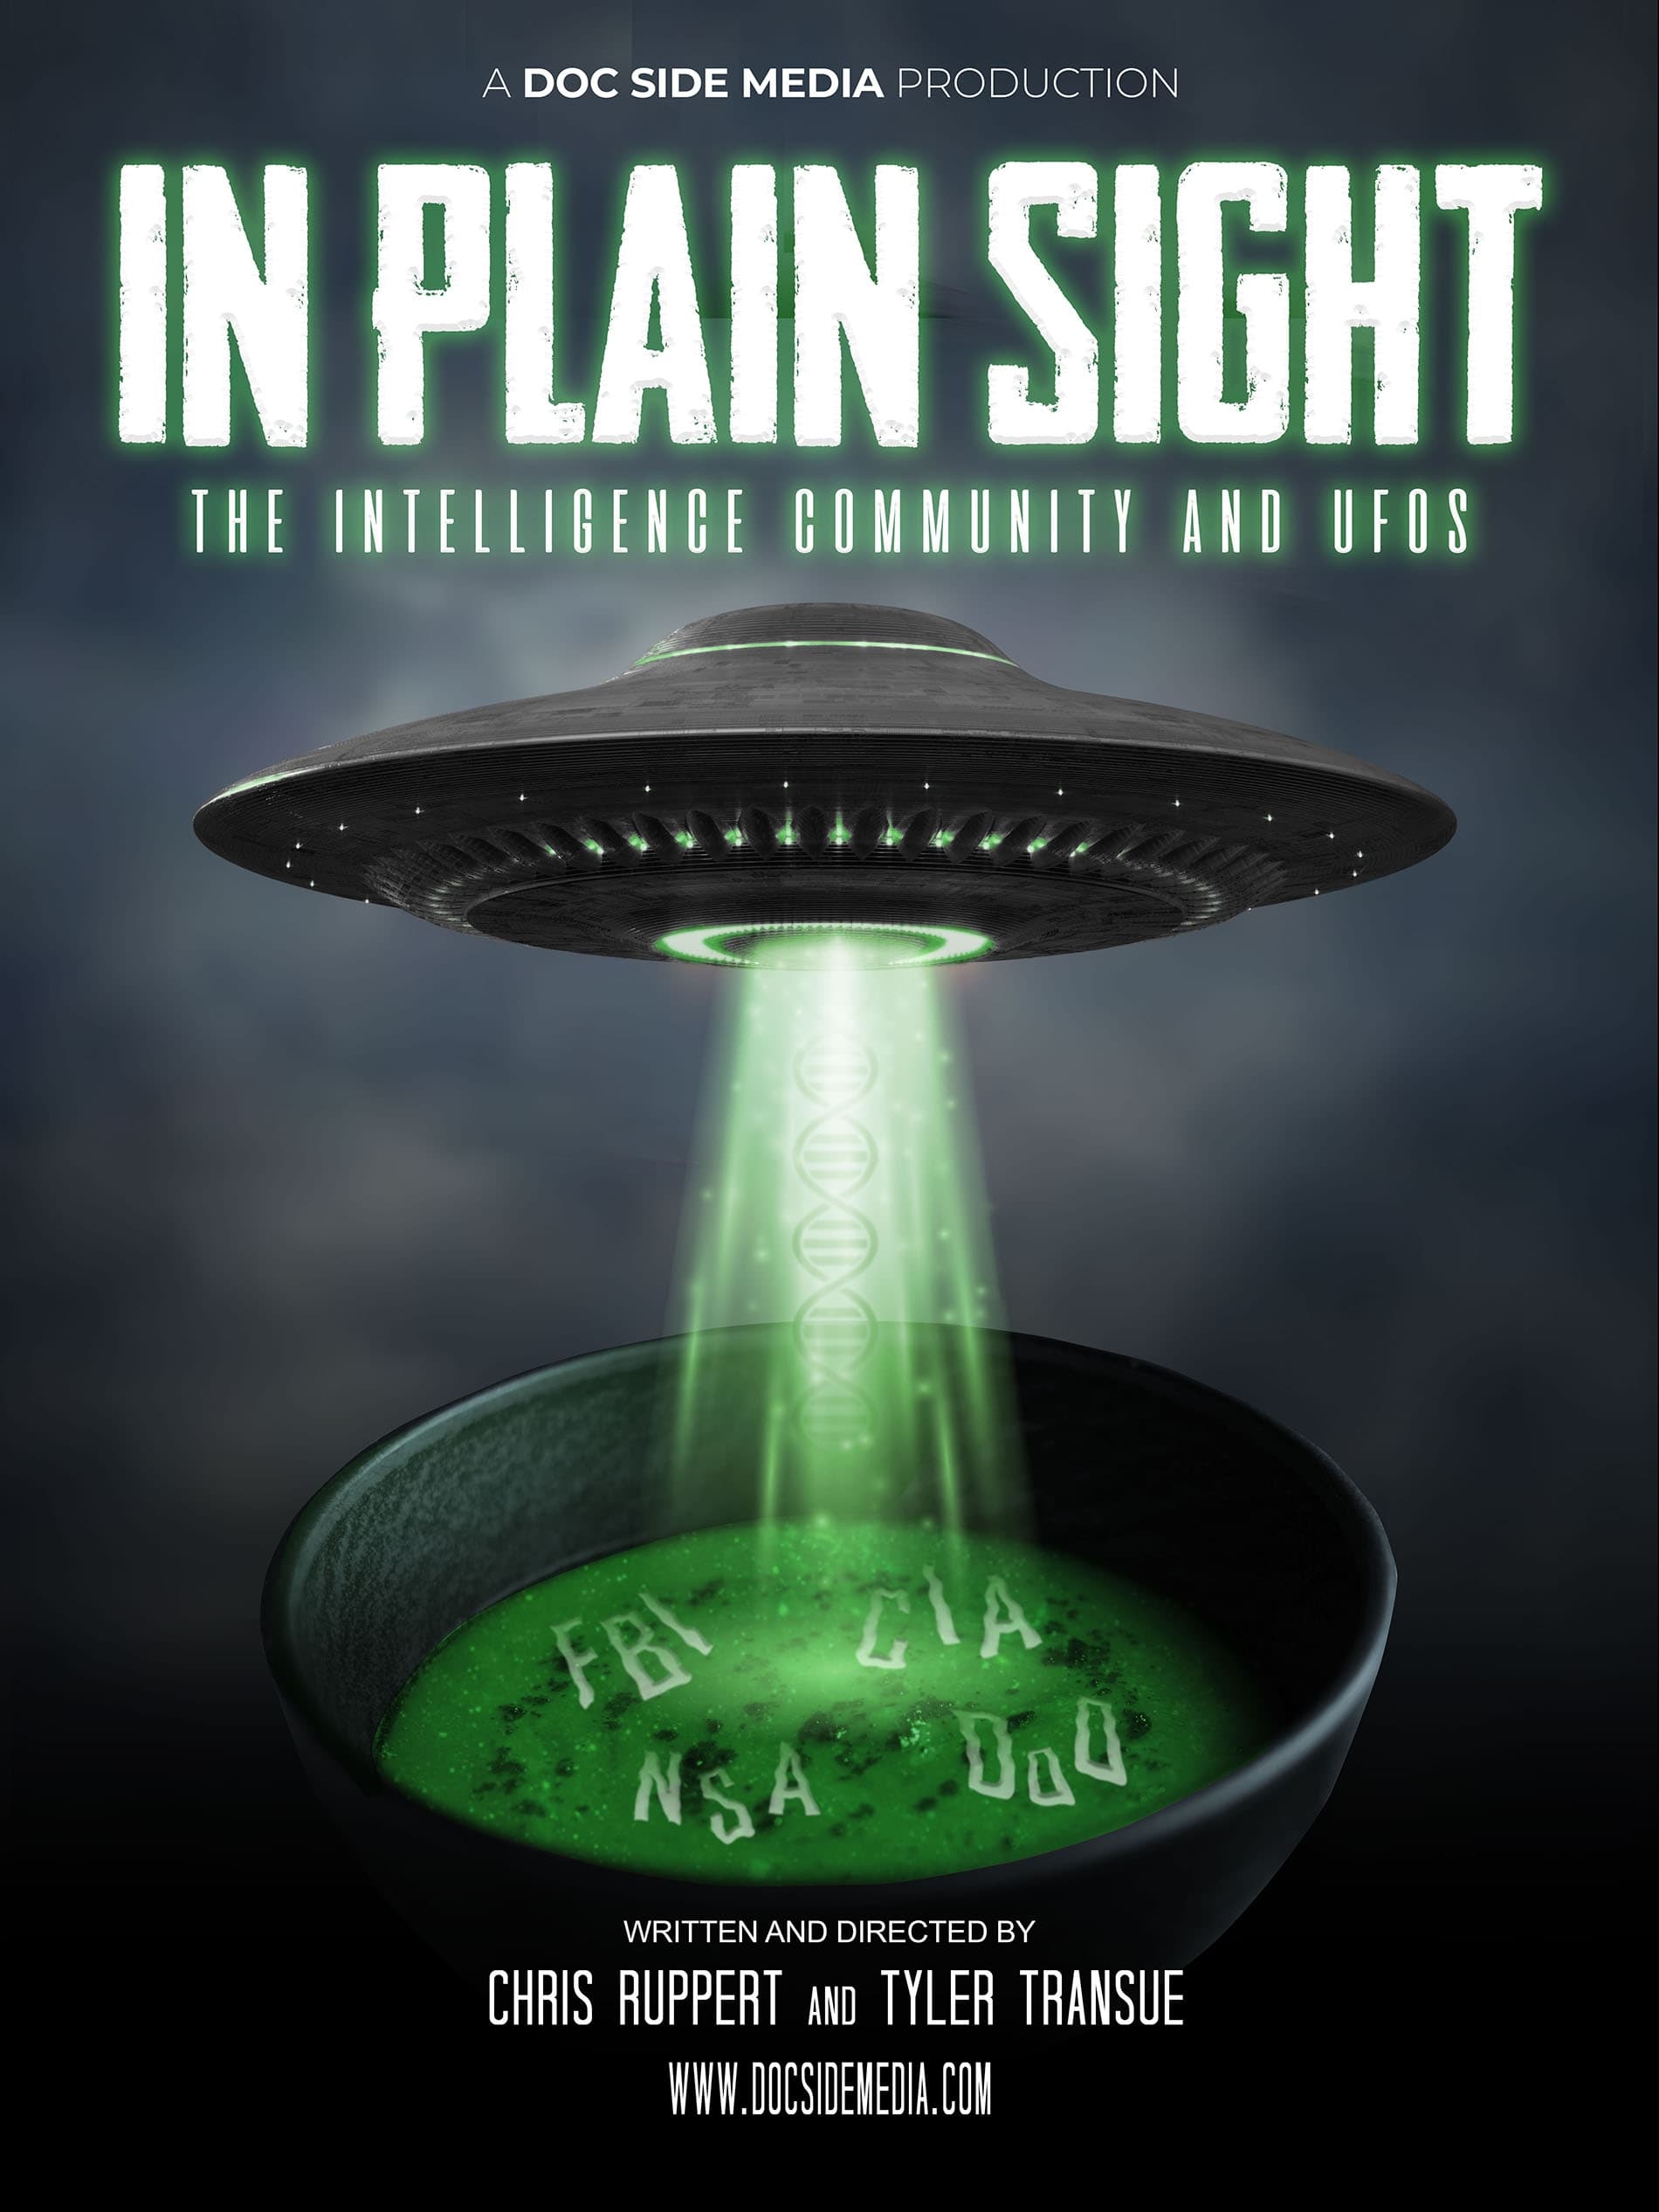 In Plain Sight The Intelligence Community and UFOs